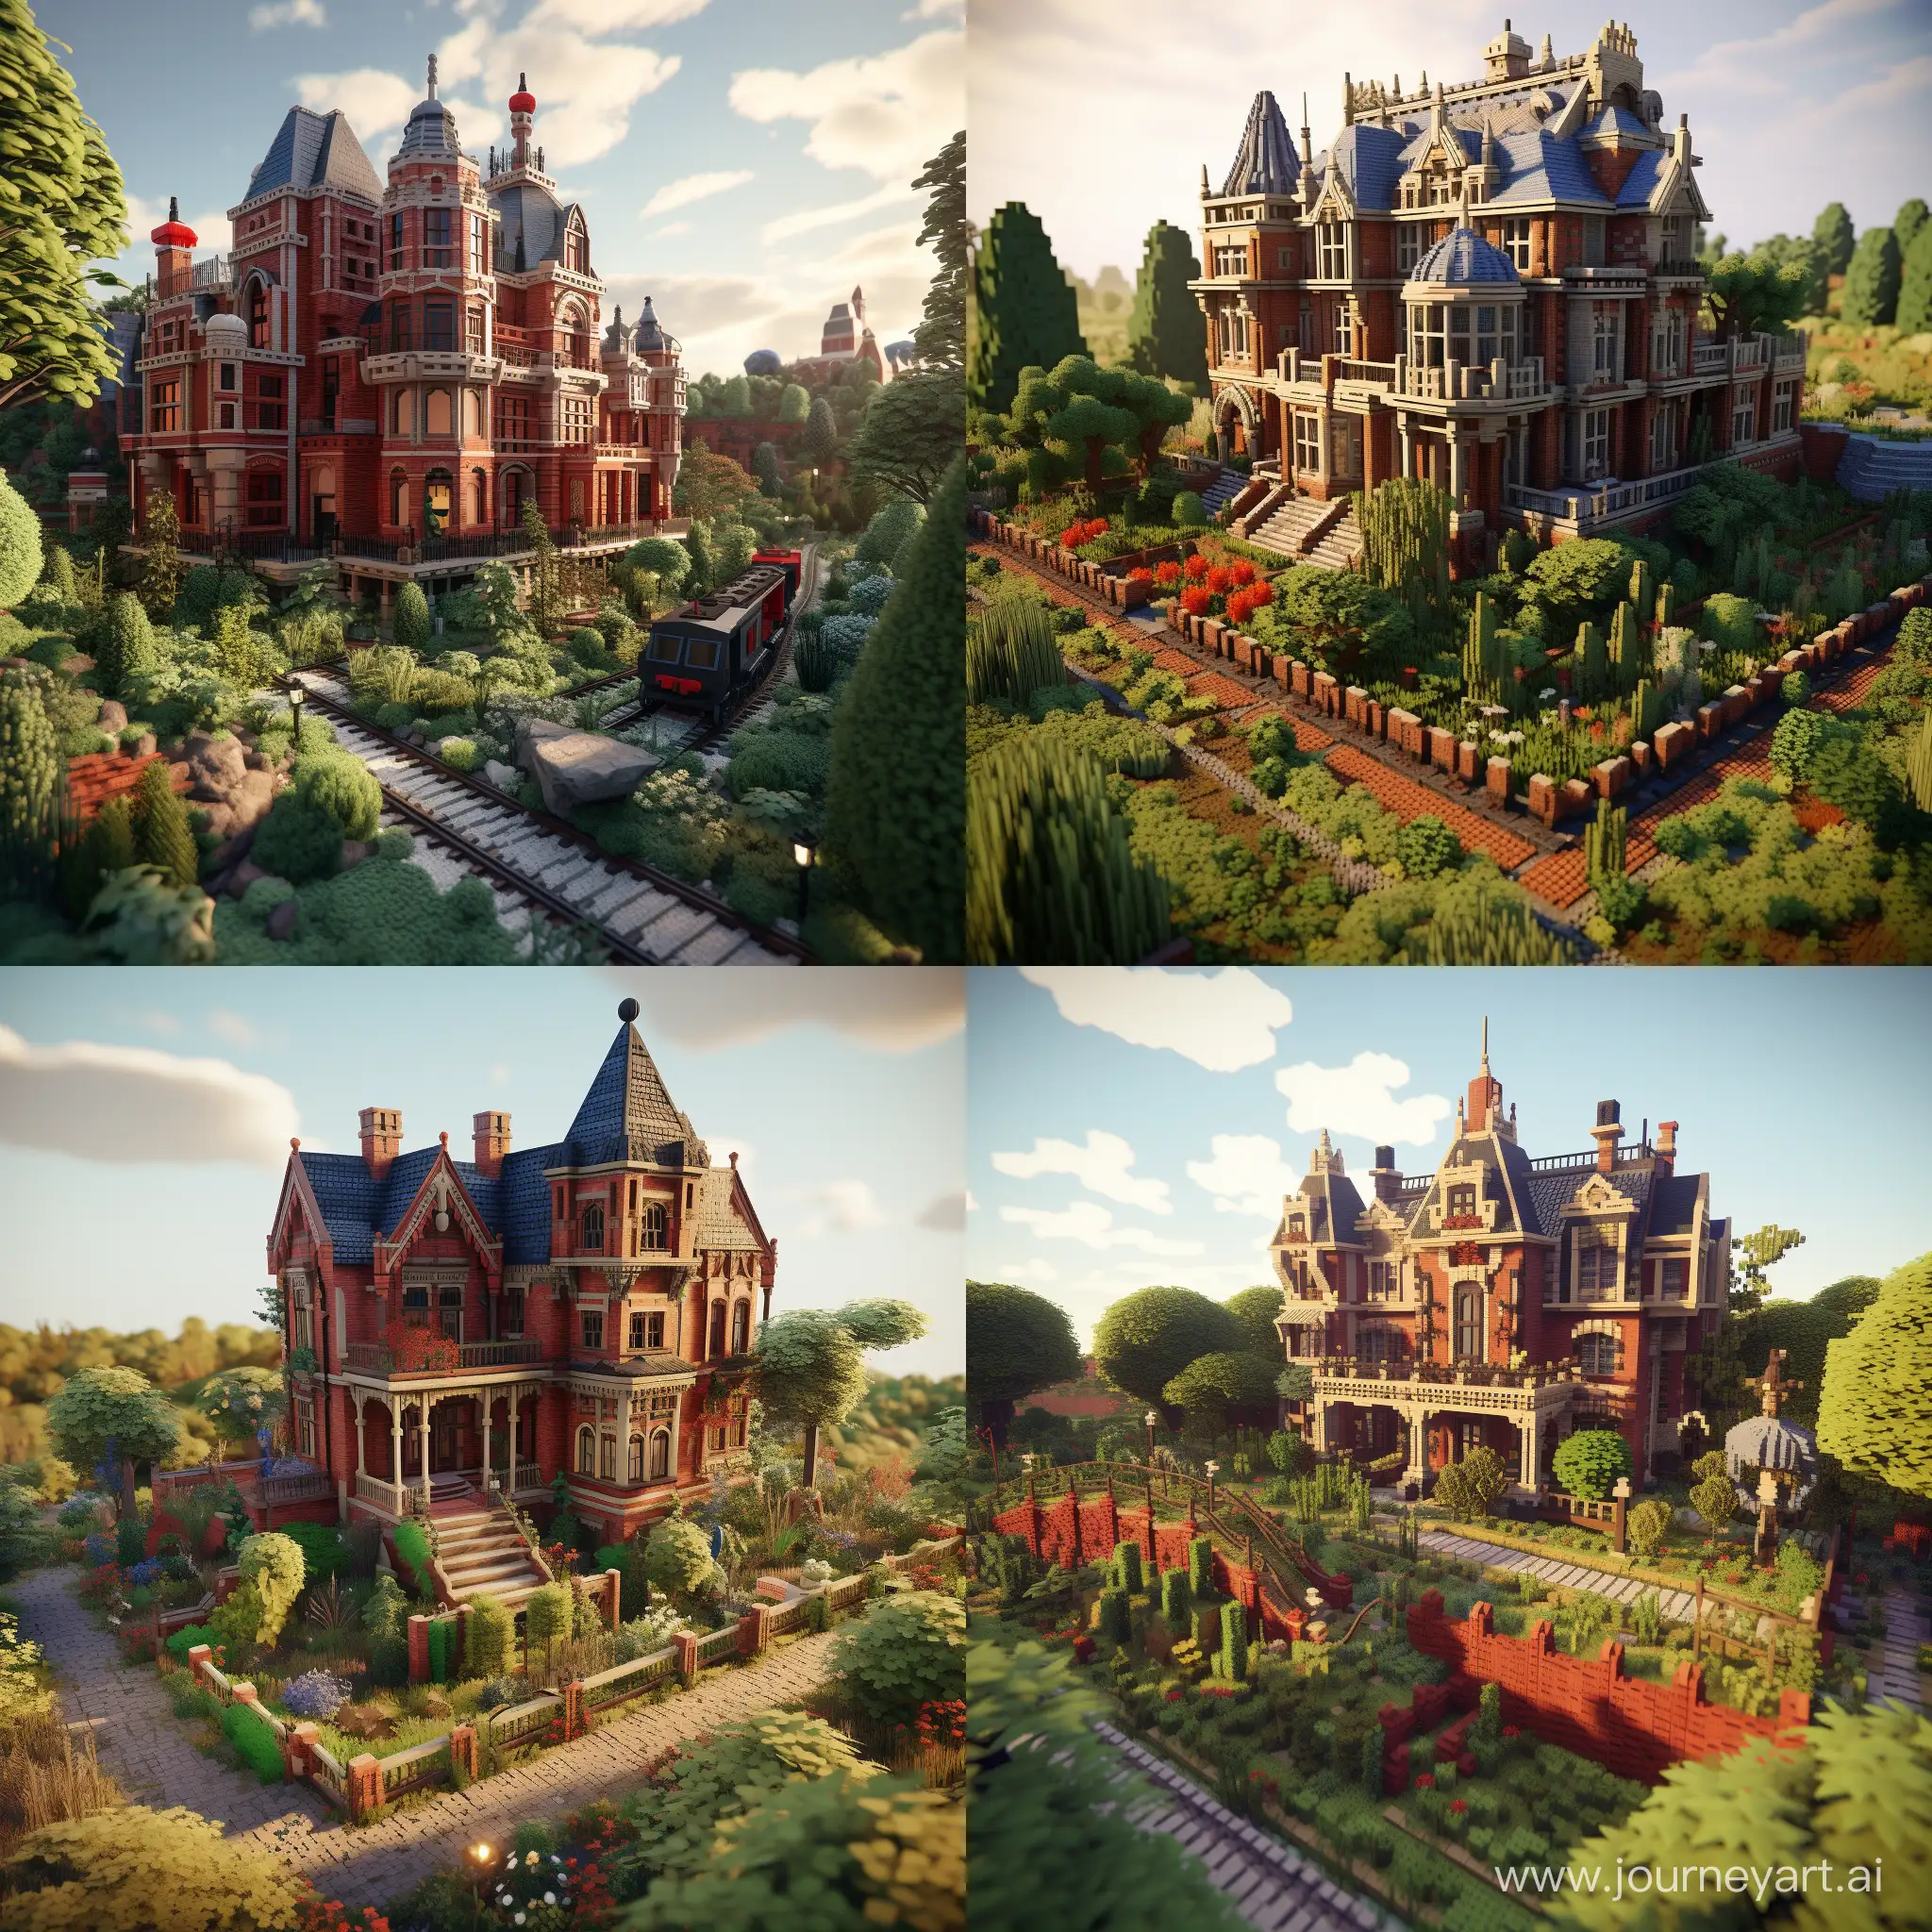 Minecraftinspired-Victorian-House-Grand-Redbrick-Mansion-with-Elevated-Garden-and-Train-Track